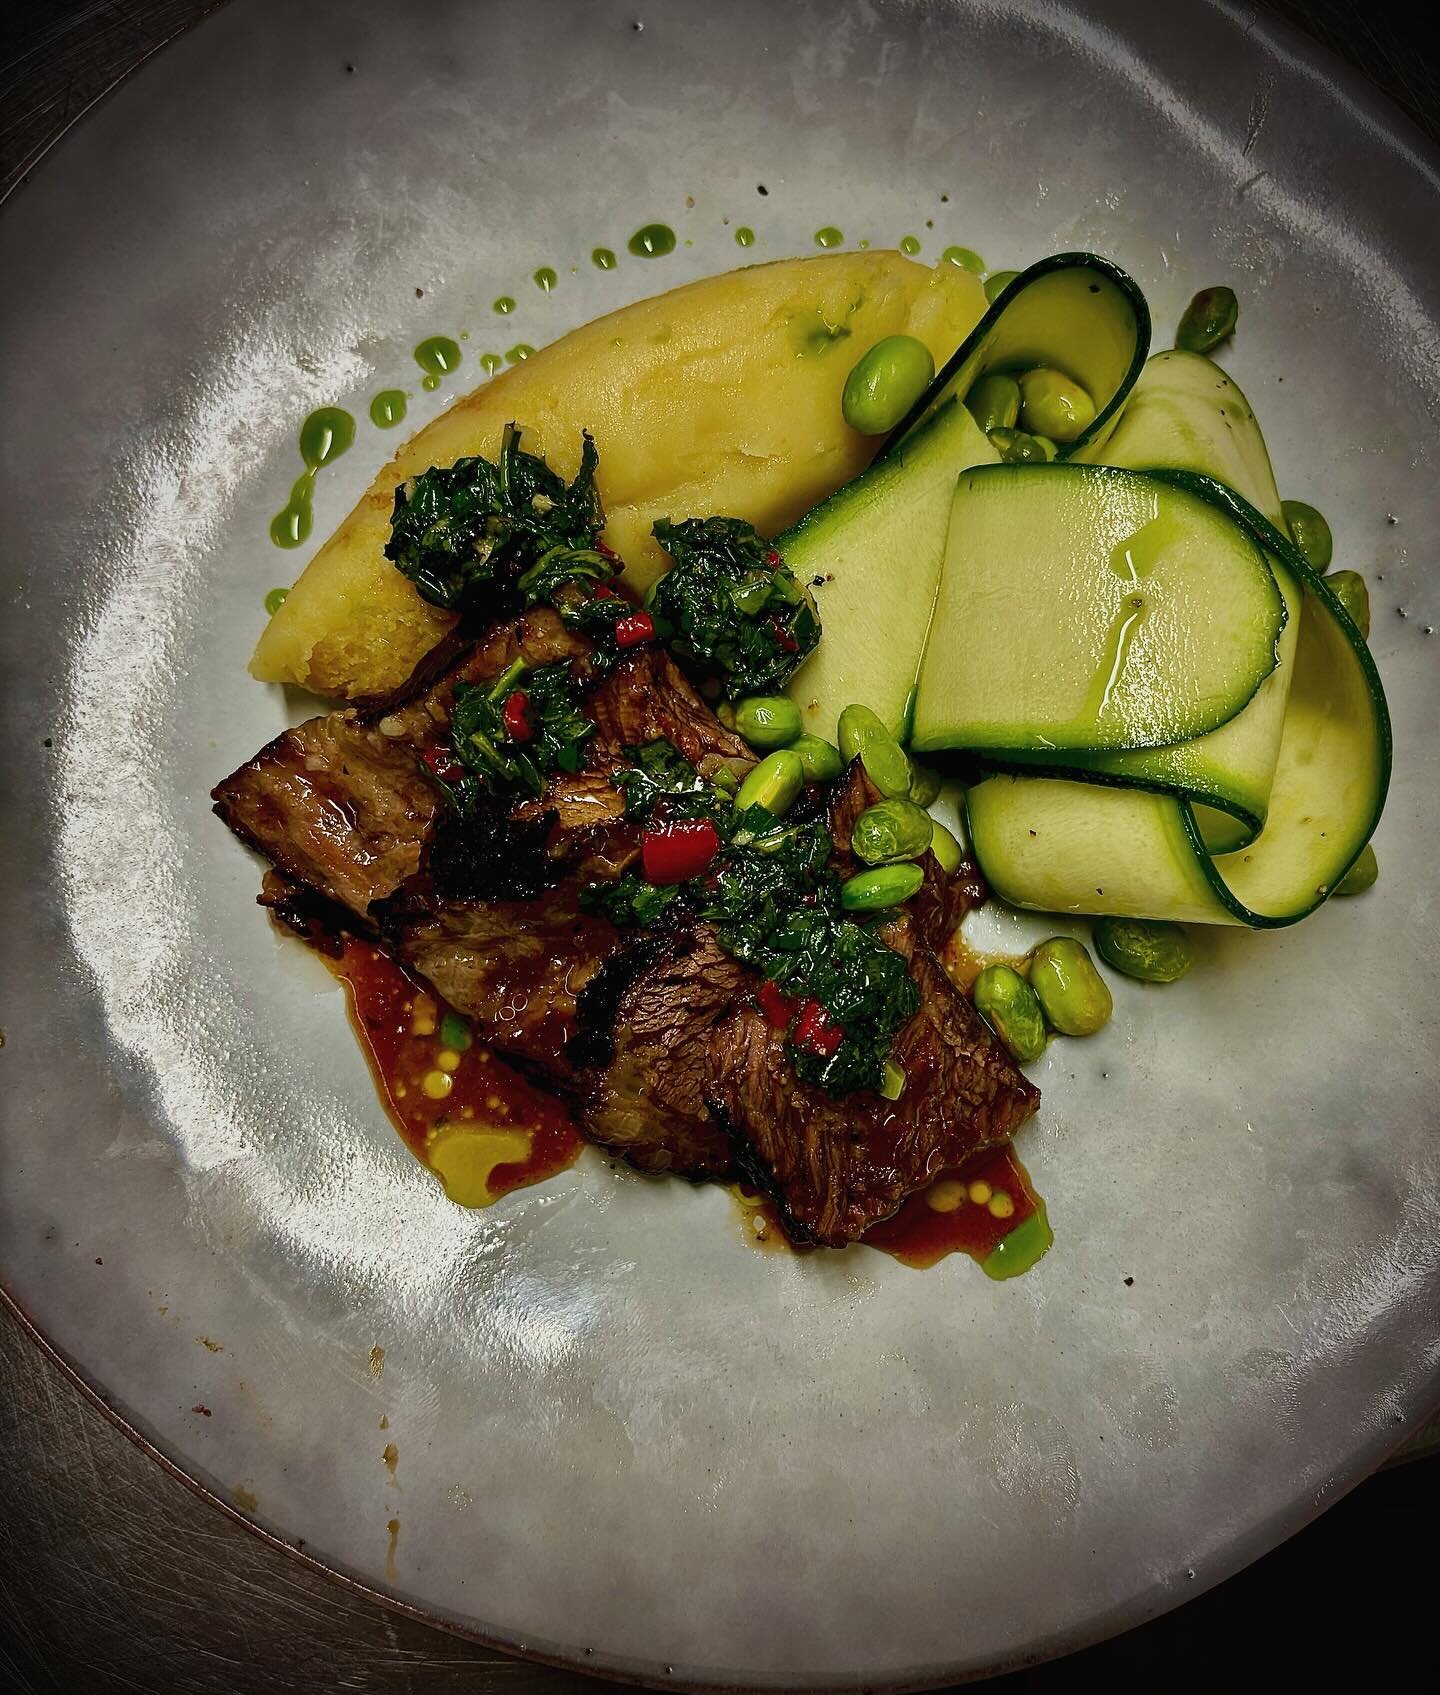 🌟 Culinary Delight Alert! 🌟

Last nights tasting session was an absolute triumph as we unveiled a delightful surprise for our esteemed client: our brand-new creation, Braised Beef Short Rib with Summer Vegetables!🥒. We created two versions and not